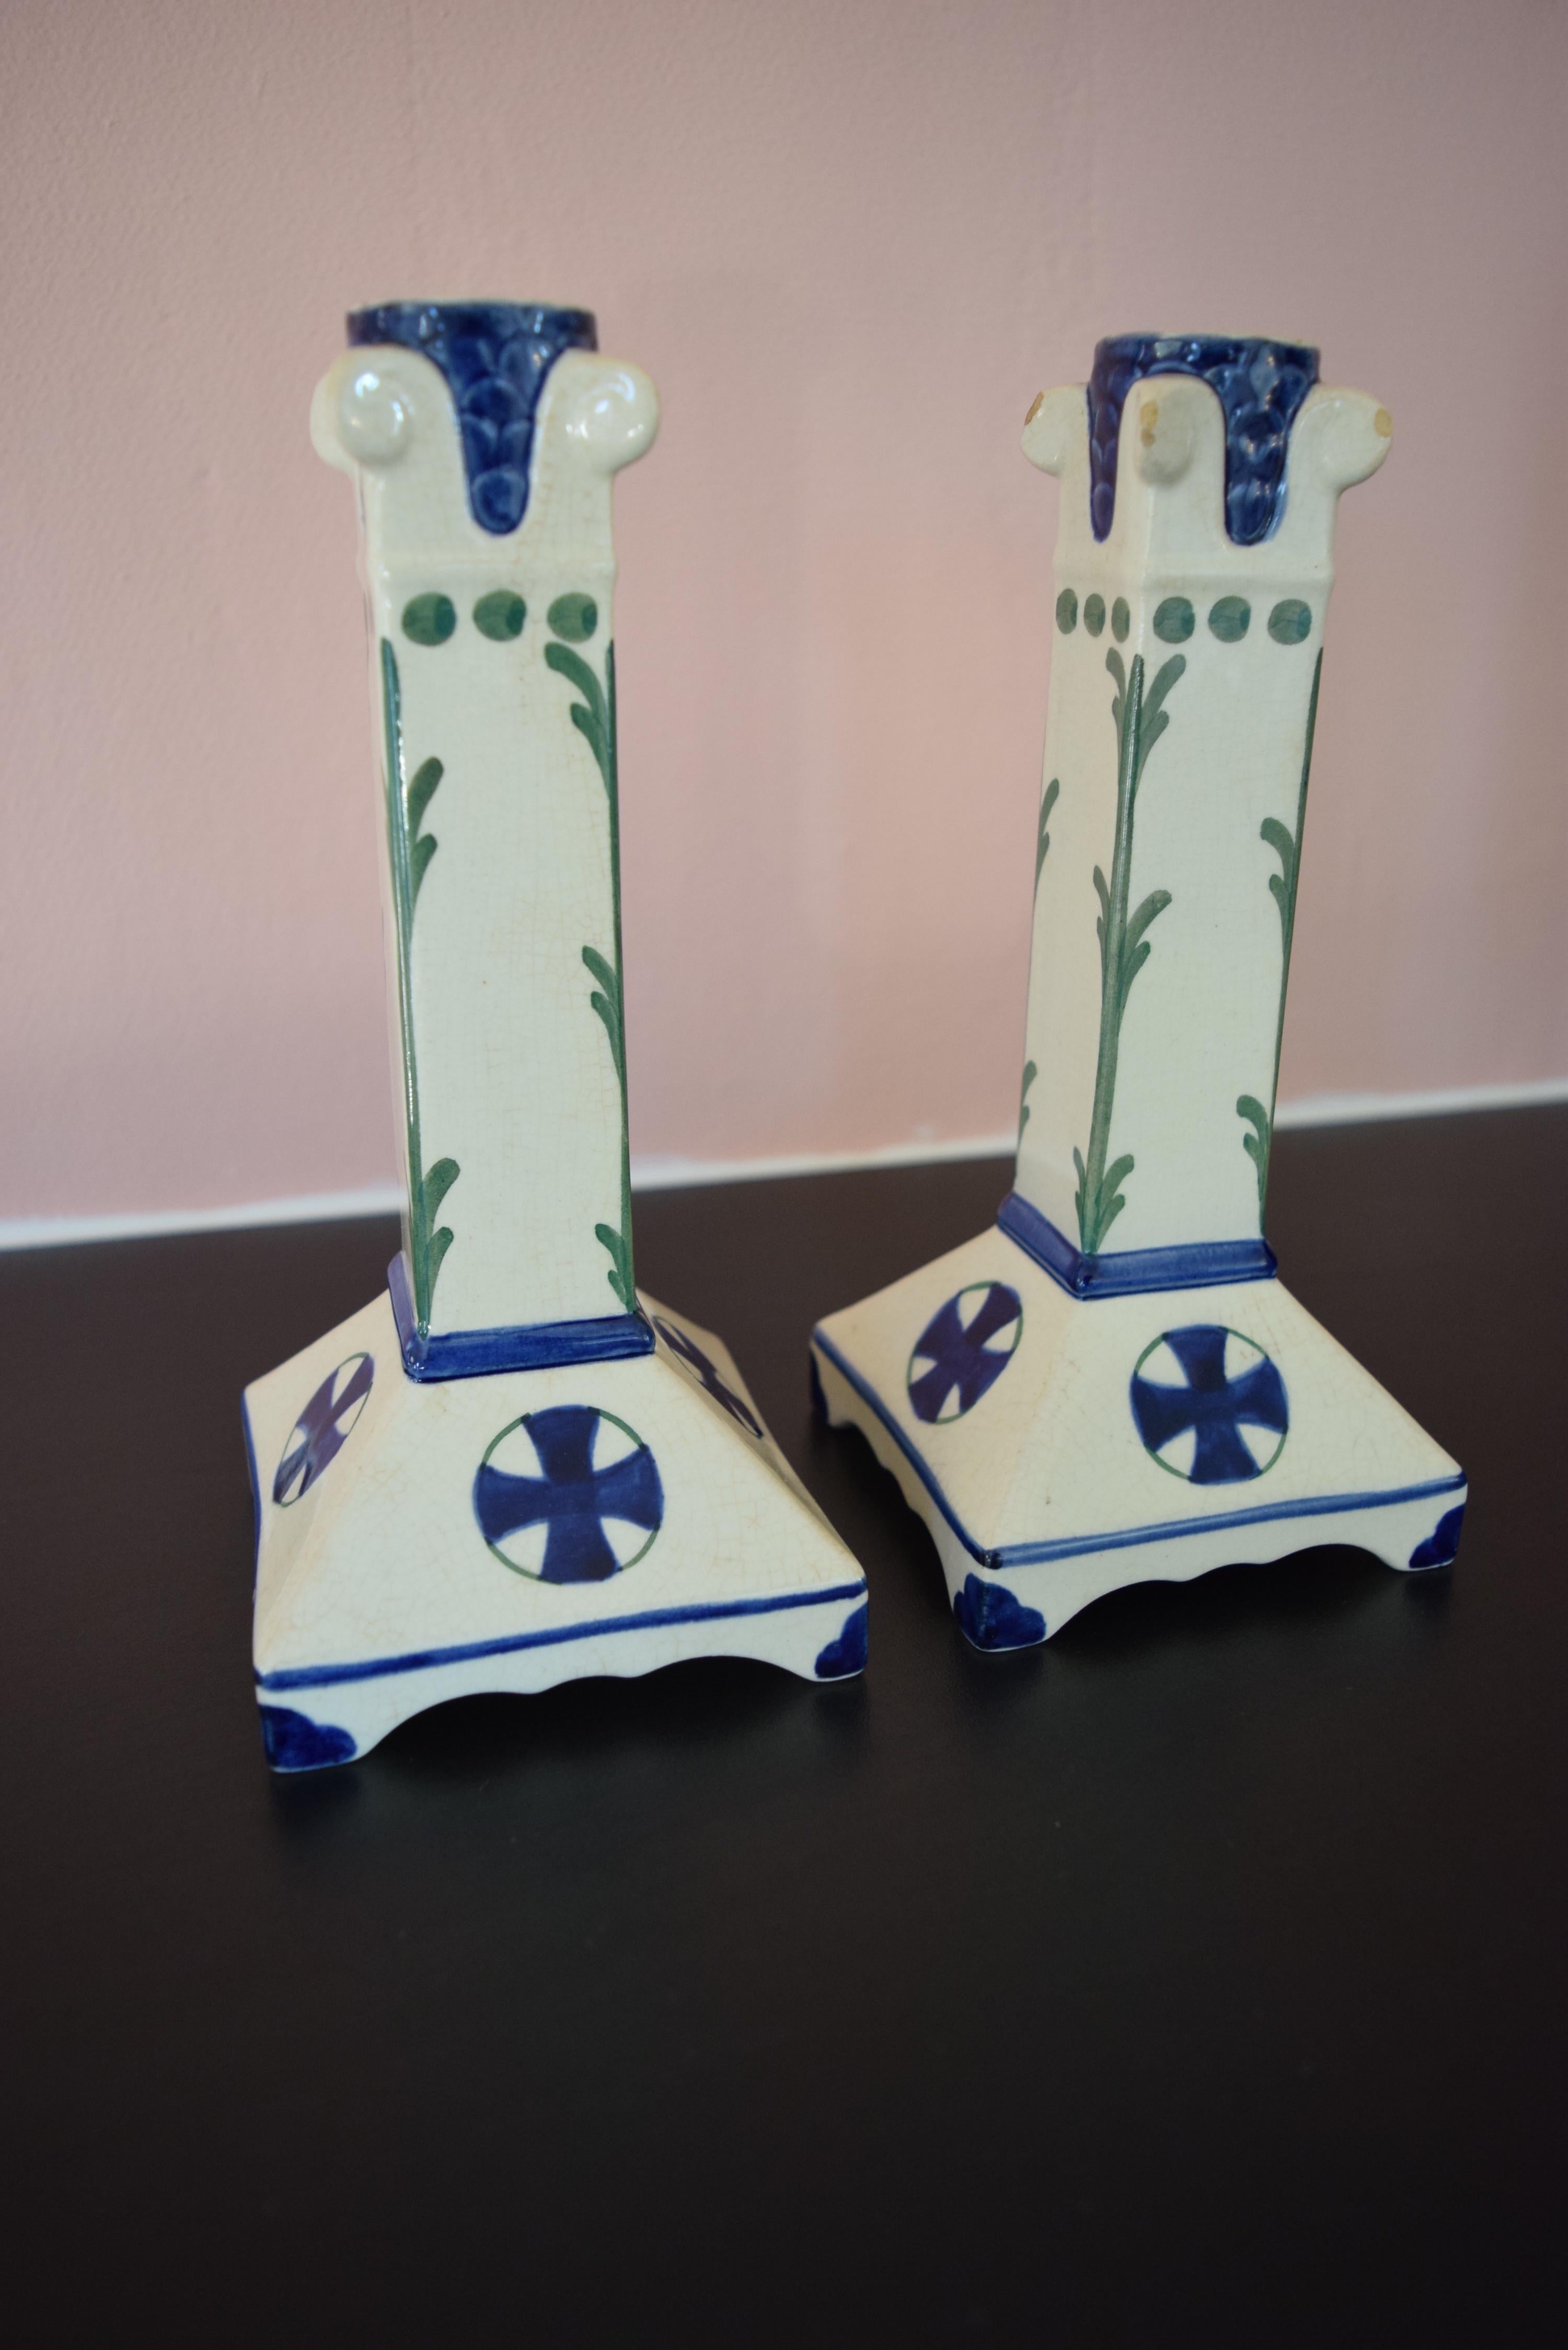 Royal Copenhagen Aluminia candlesticks made of faience with Classic Aluminia decoration in blue and green. Marked at the bottom A and 478/422, Copenhagen Denmark. Pre 1906.